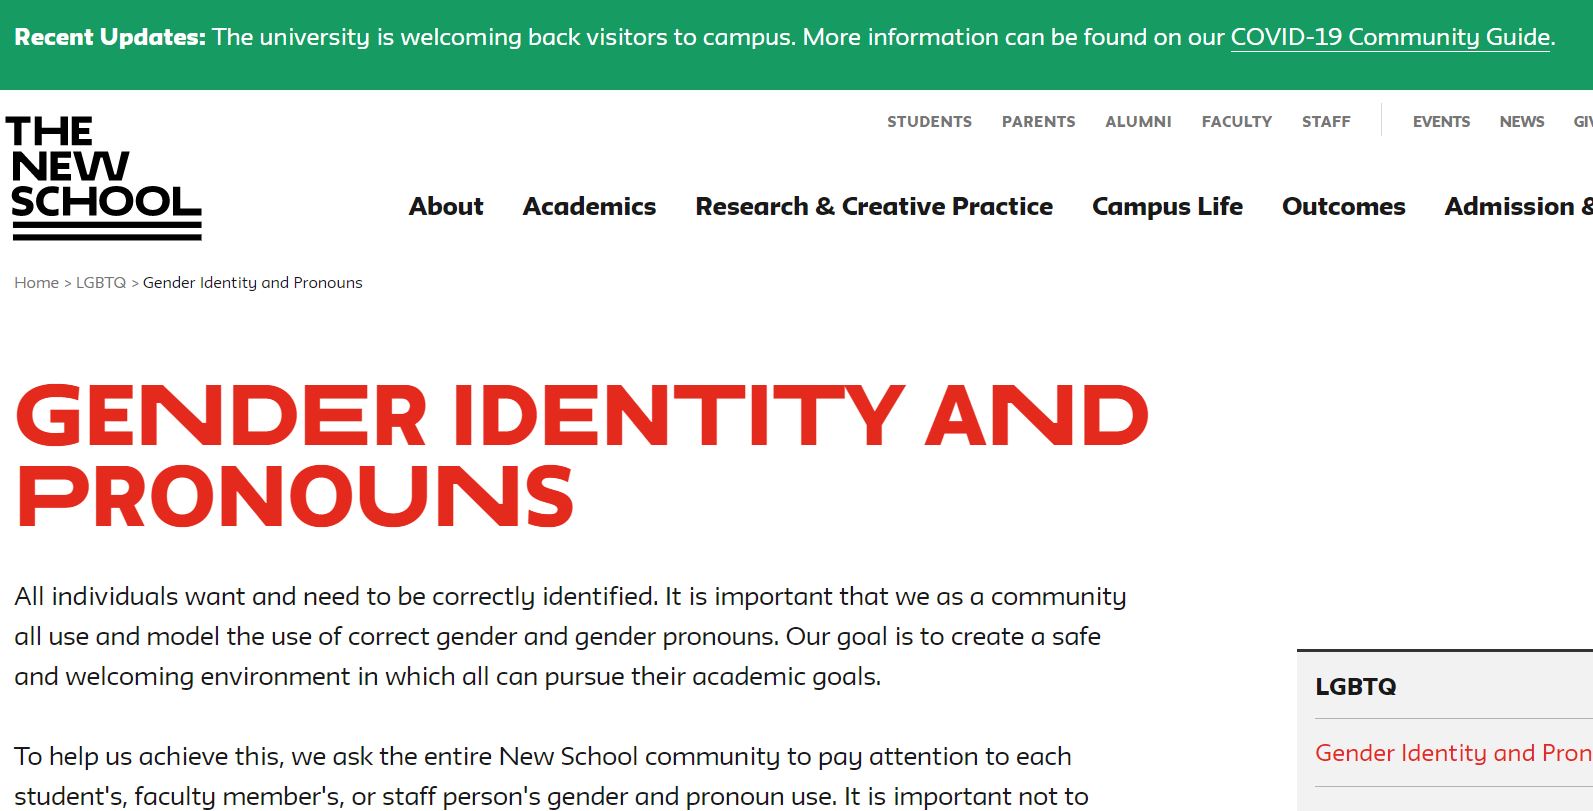 Gender Identity and Pronouns- The New School.  